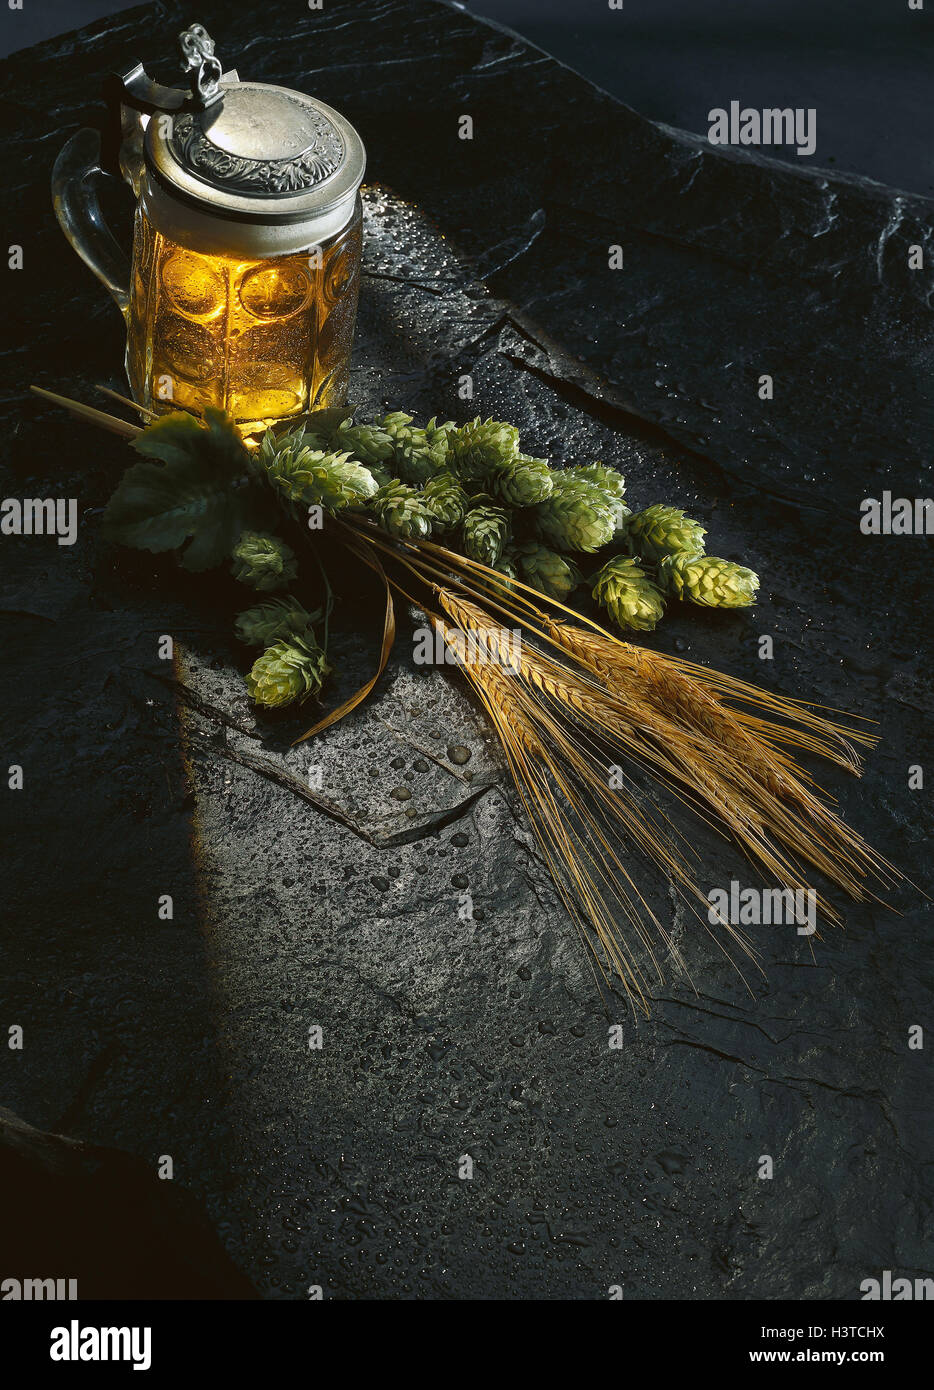 , Still life, beer mug, hop, grain, Still life, icon, purity requirement, law, beer, beer is brewing, eyebrows, brewing art, ingredients, barley, drink, alcohol, alcoholic, glass, jug, tin lid, Stock Photo